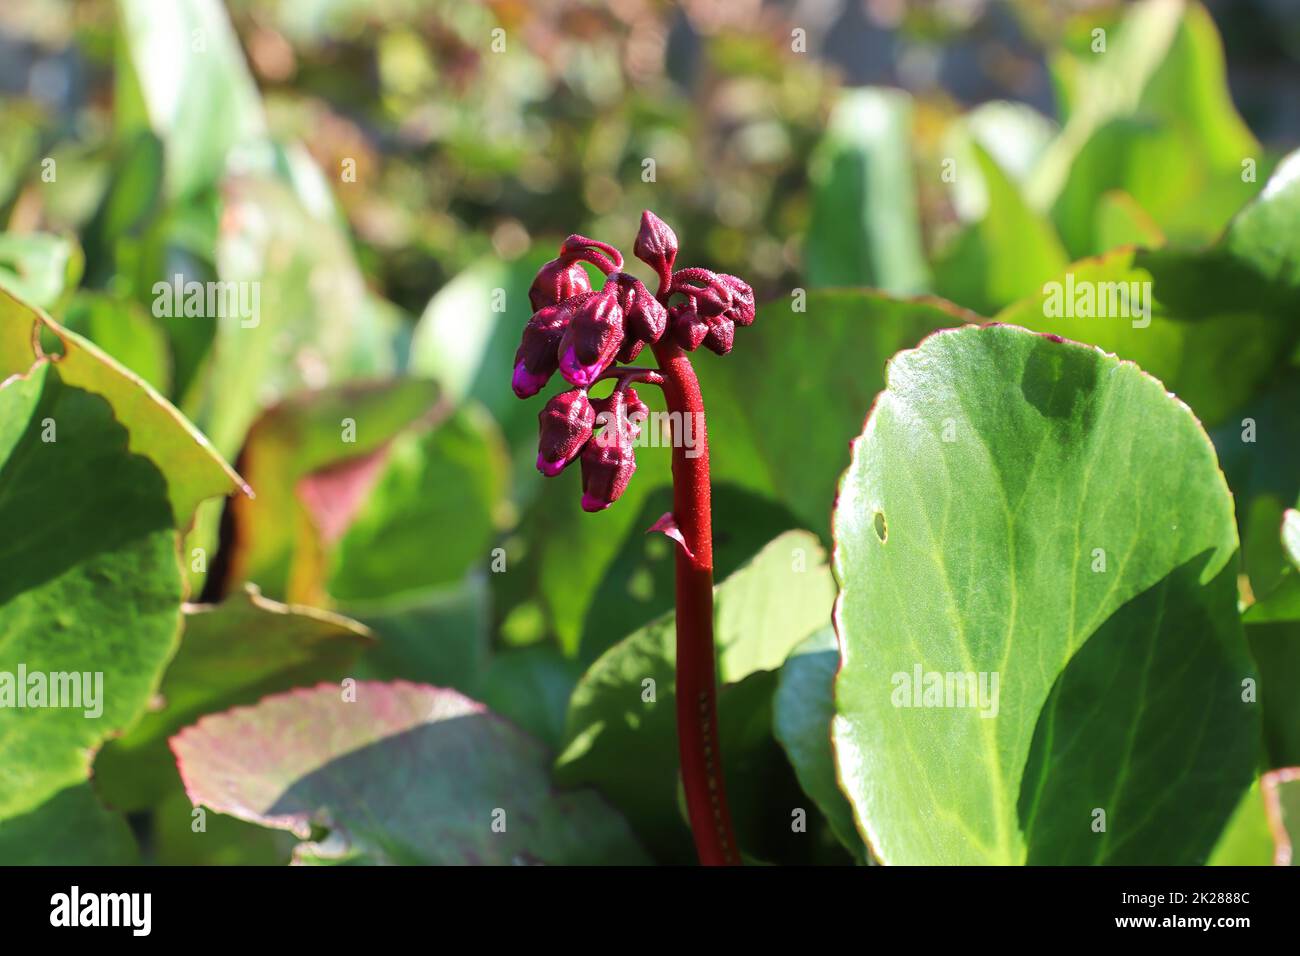 Closeup view of the spike of flowers on a bergenia plant Stock Photo